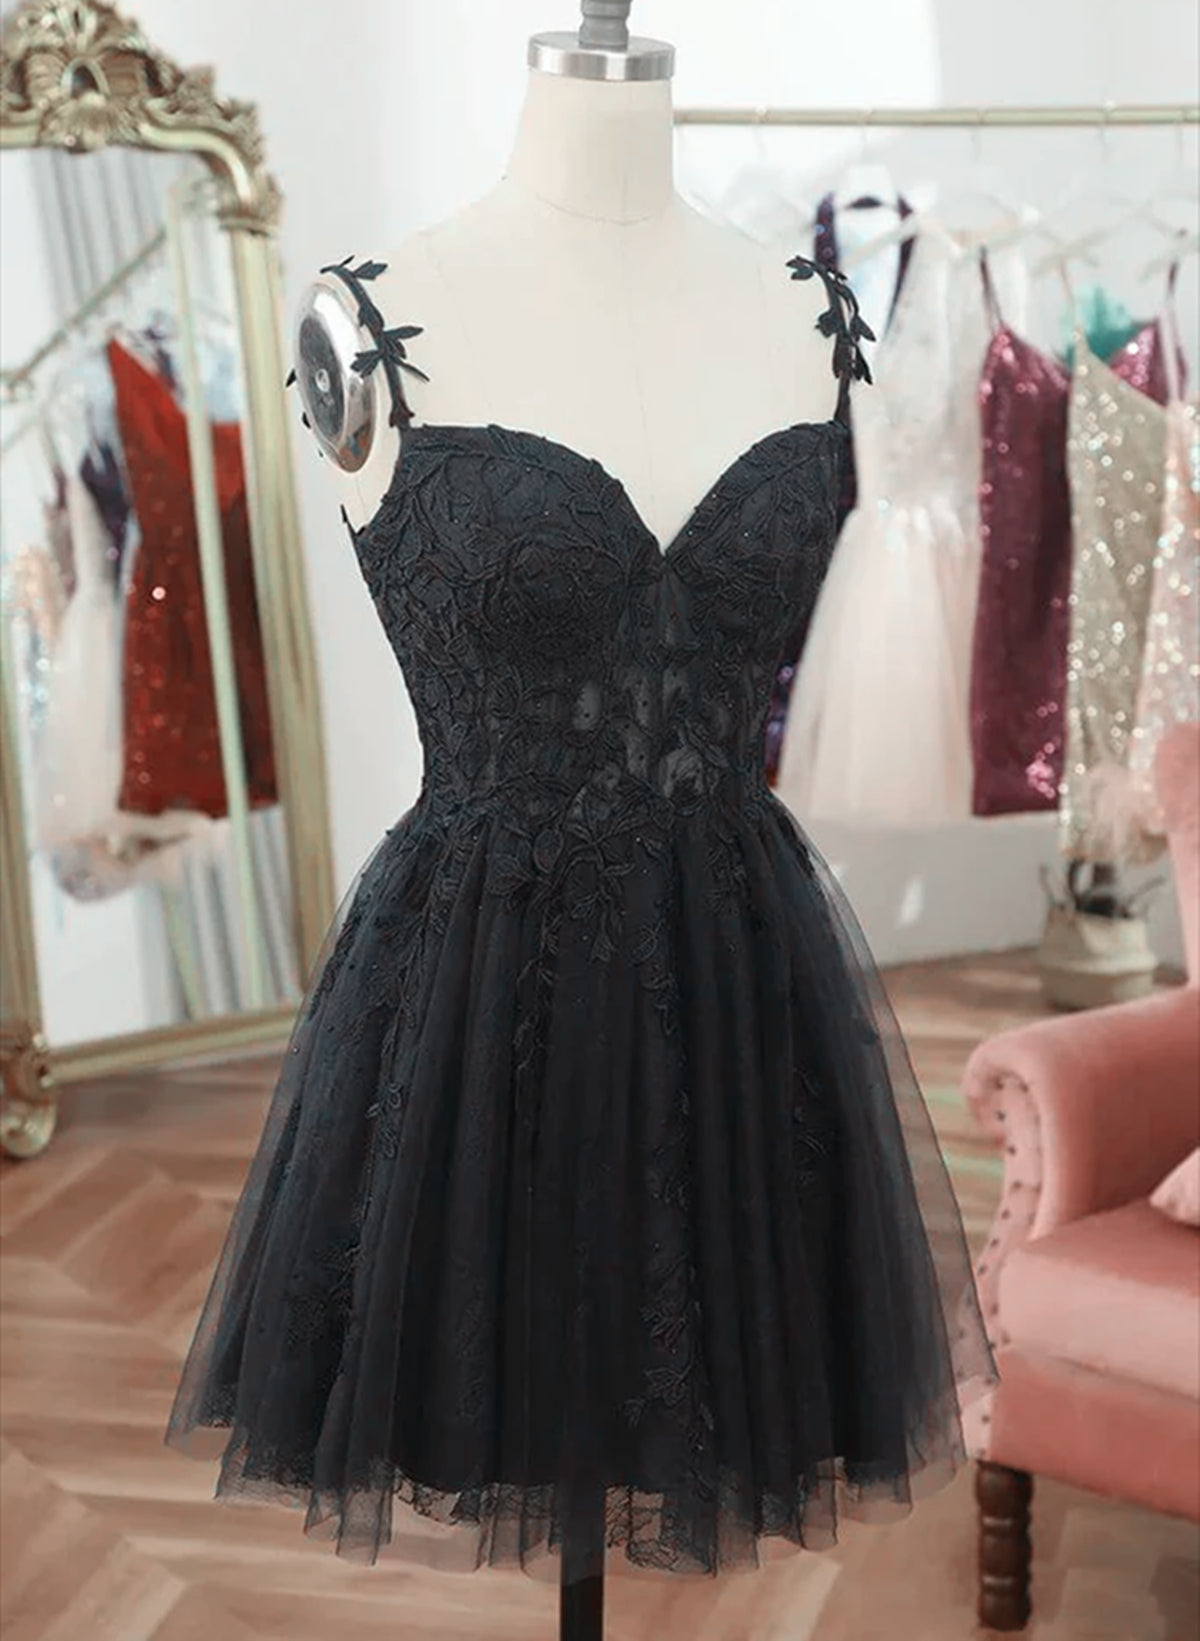 Bridesmaid Dresses Shops, Chic Black Lace Straps Tulle Short Party Drss, Black Sweetheart Homecoming Dress